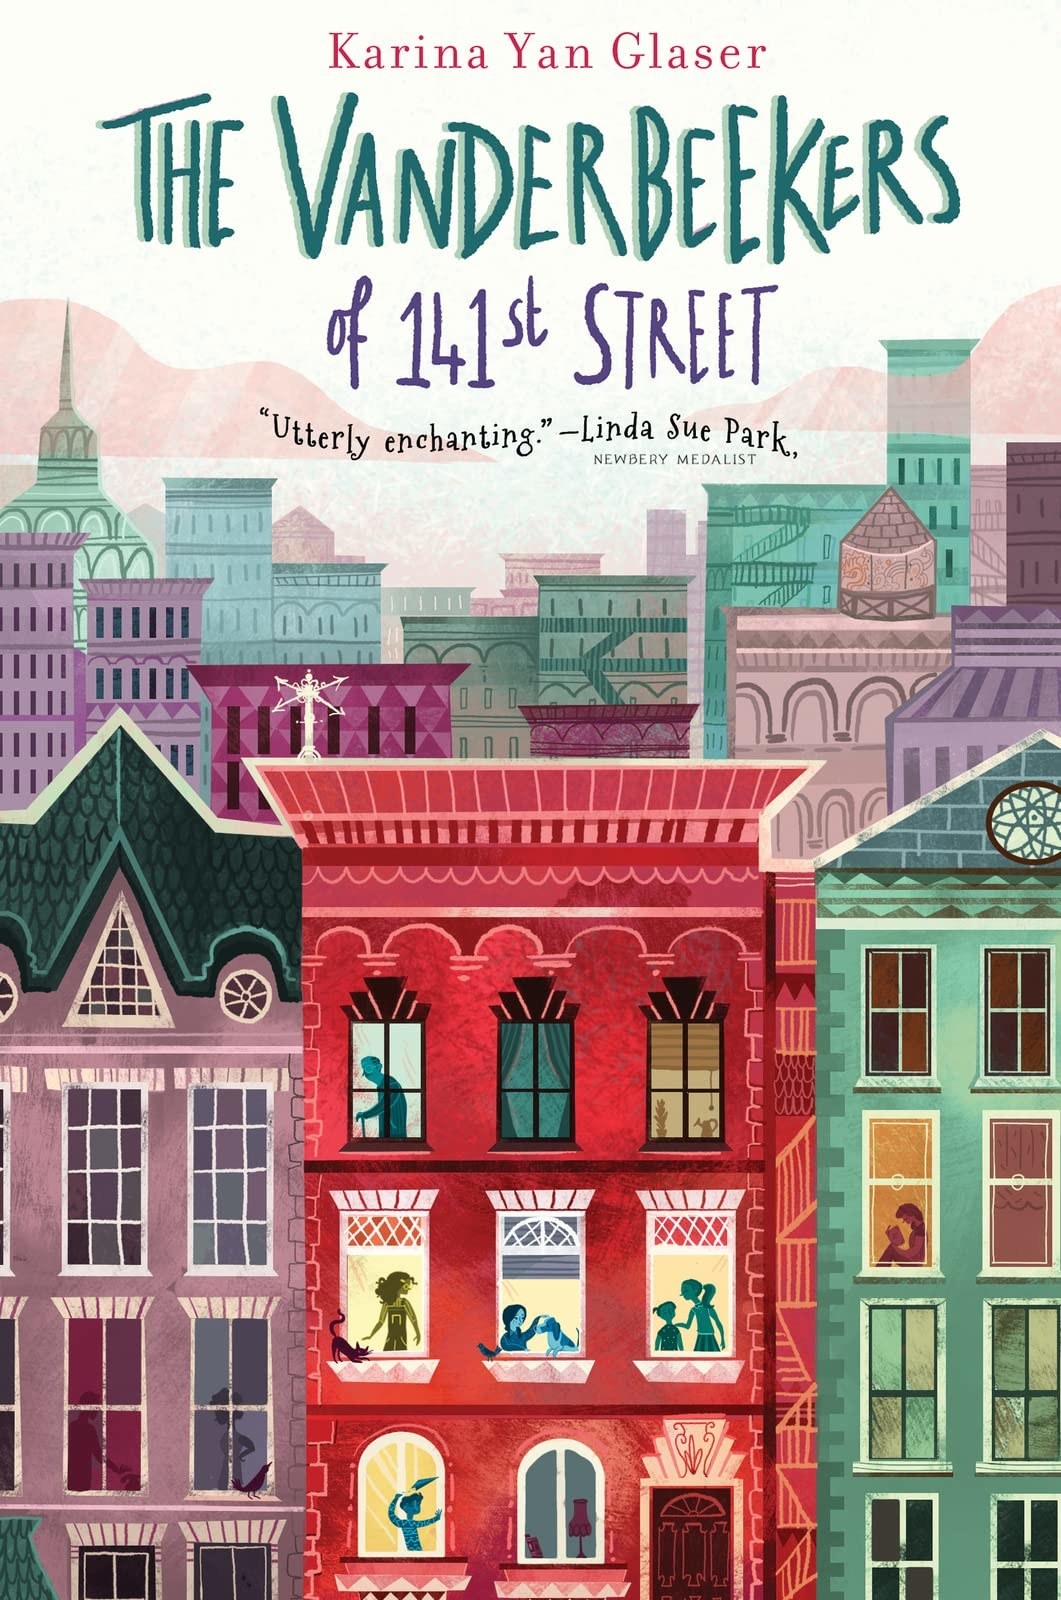 A colorful illustrated picture of New York City. A red building is in the center of the cover. From the windows you can see five children. An older man is in the top lefthand window. The title reads: &quot;The Vanderbeekers of 141st Street&quot;